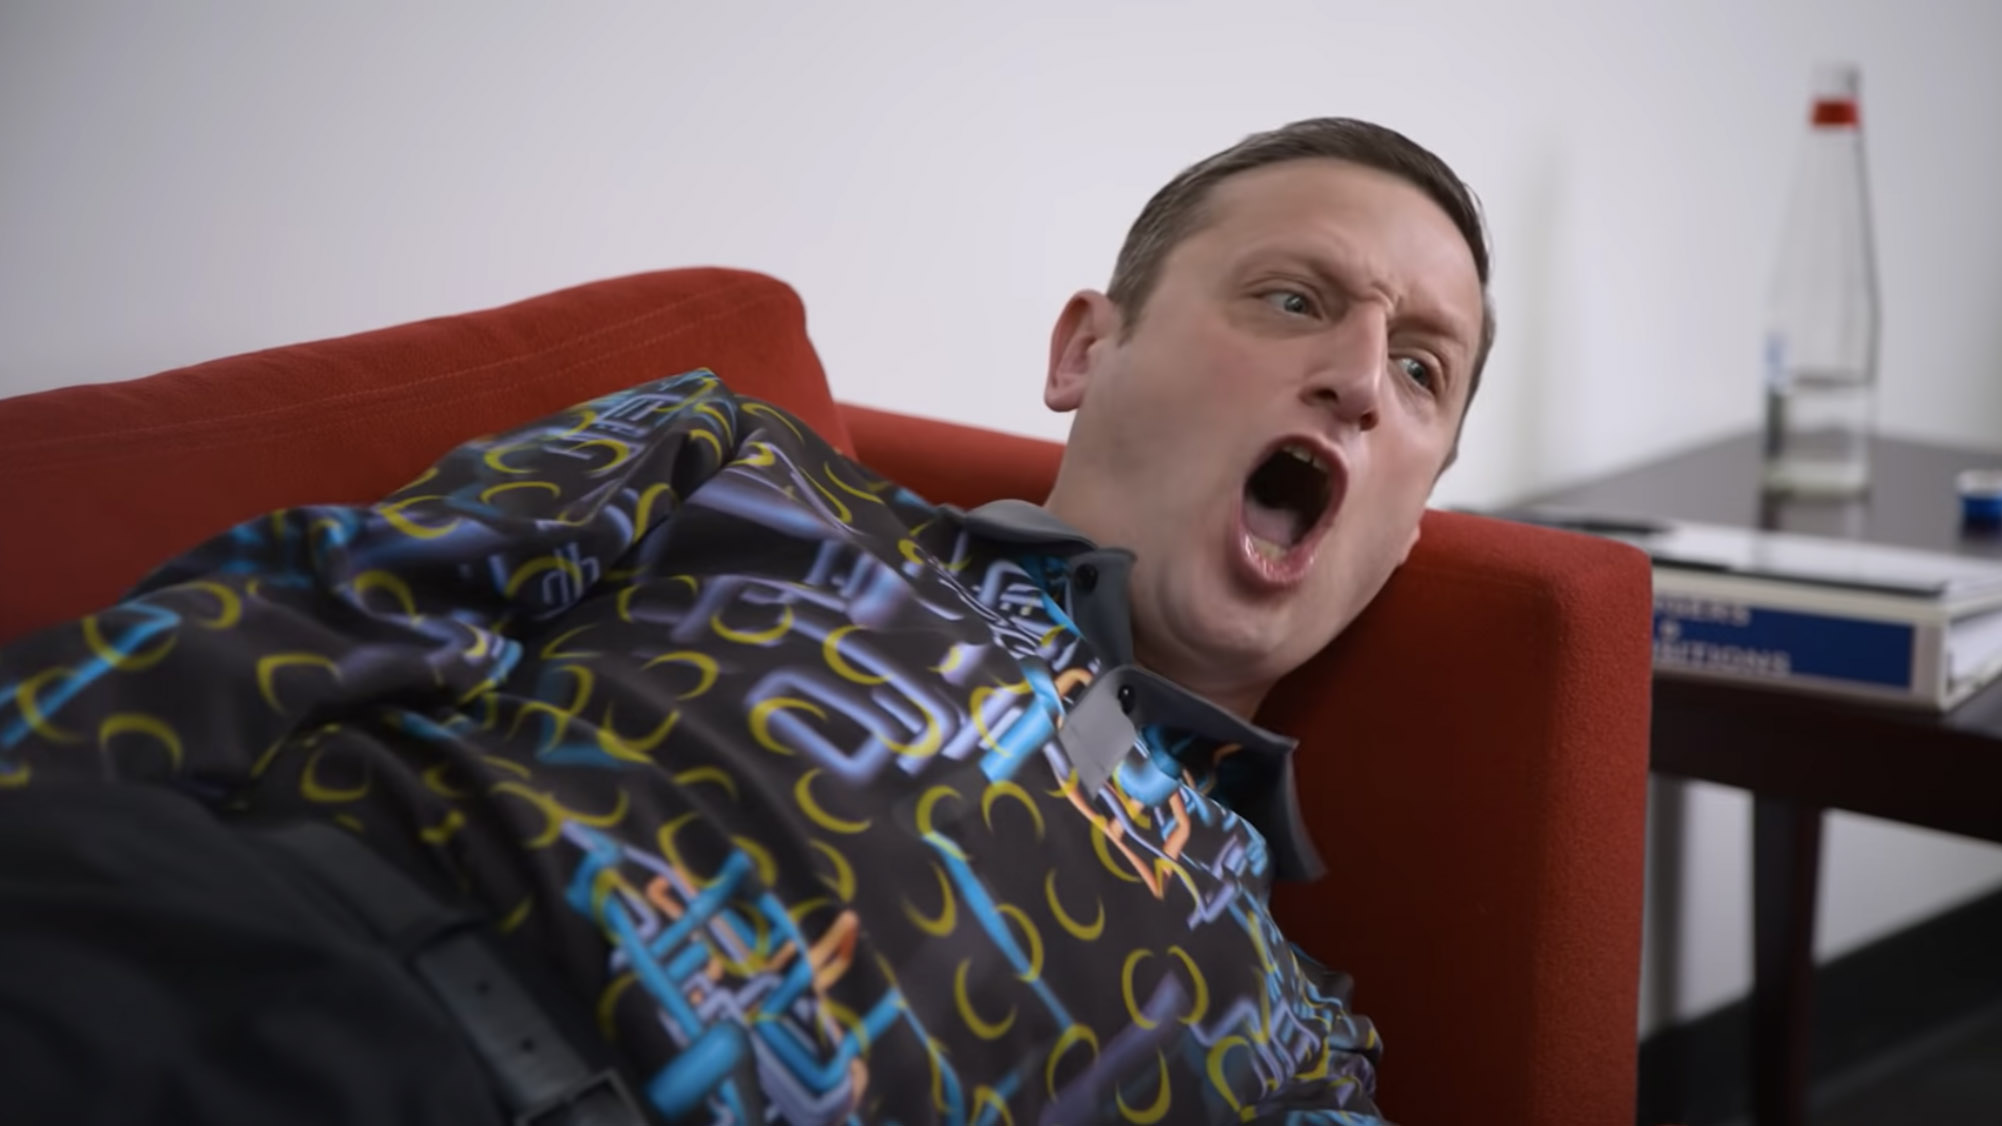 Tim Robinson shouts while lying on a couch in I Think You Should Leave